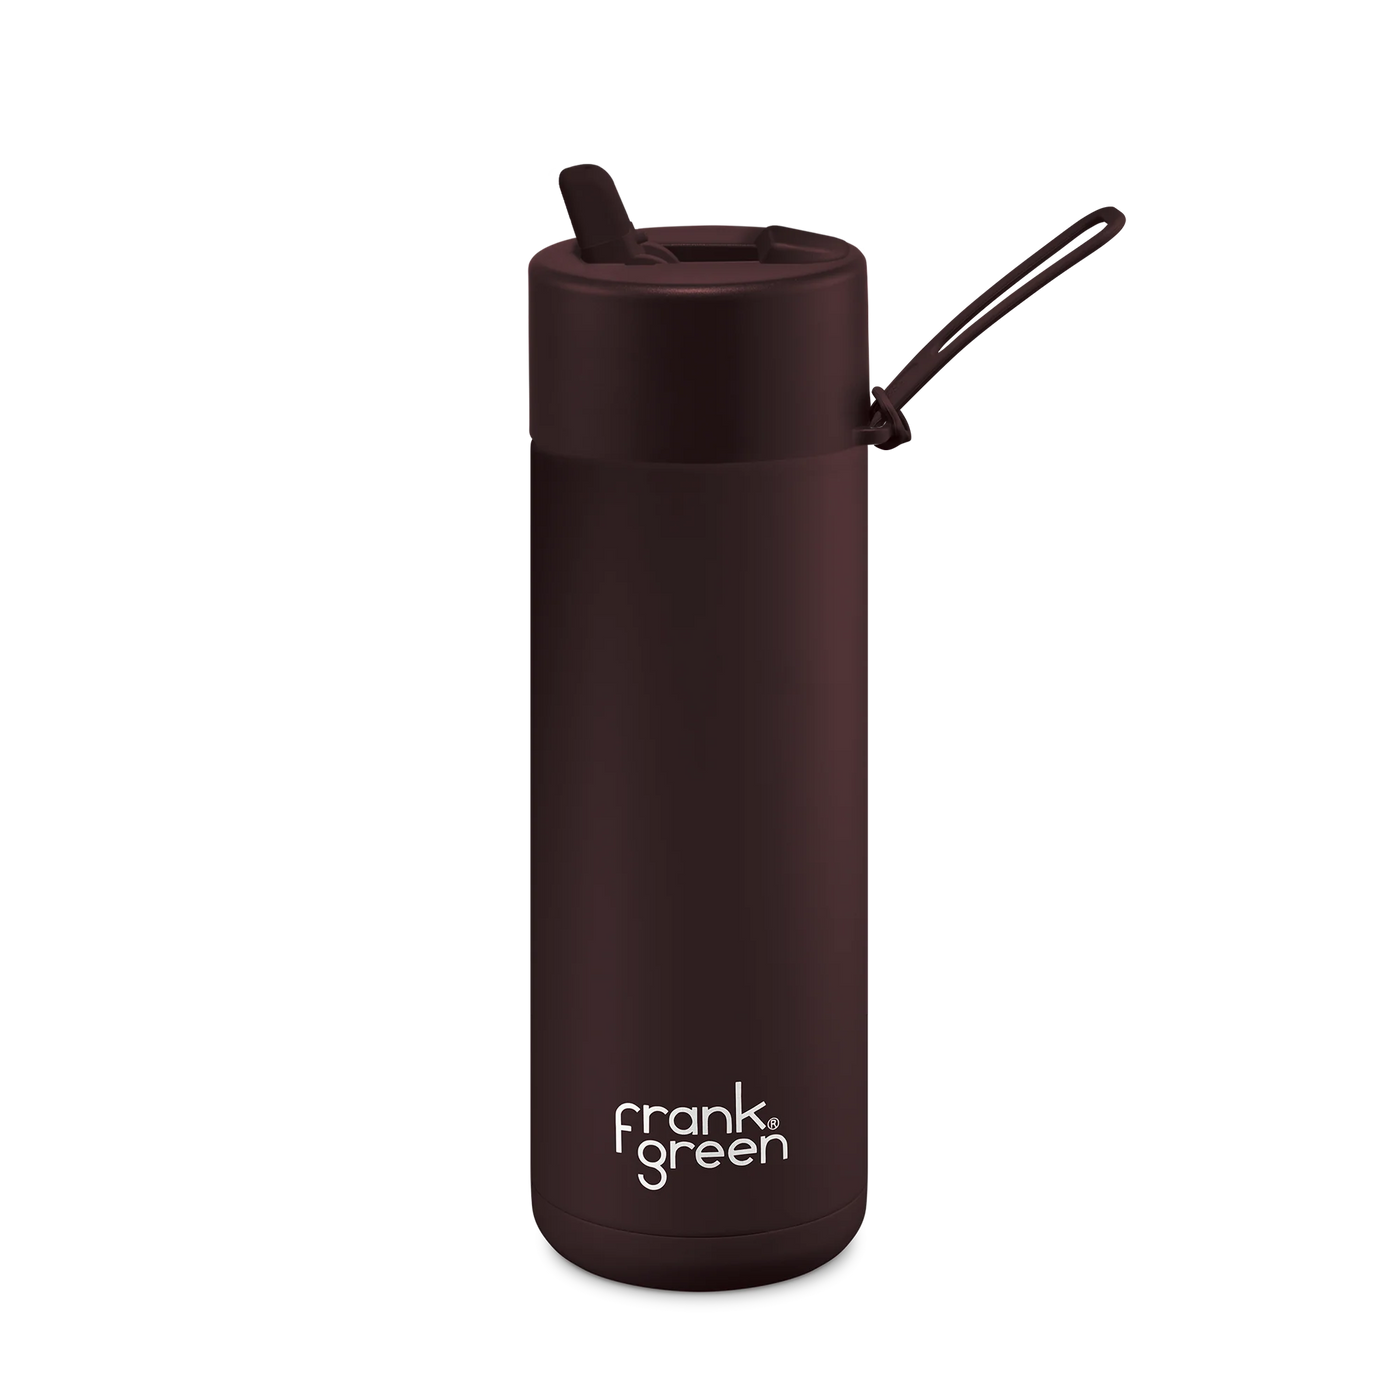 Frank Green Limited Edition Ceramic Reusable Bottle 20oz/595ML - Chocolate Mealtime Frank Green 